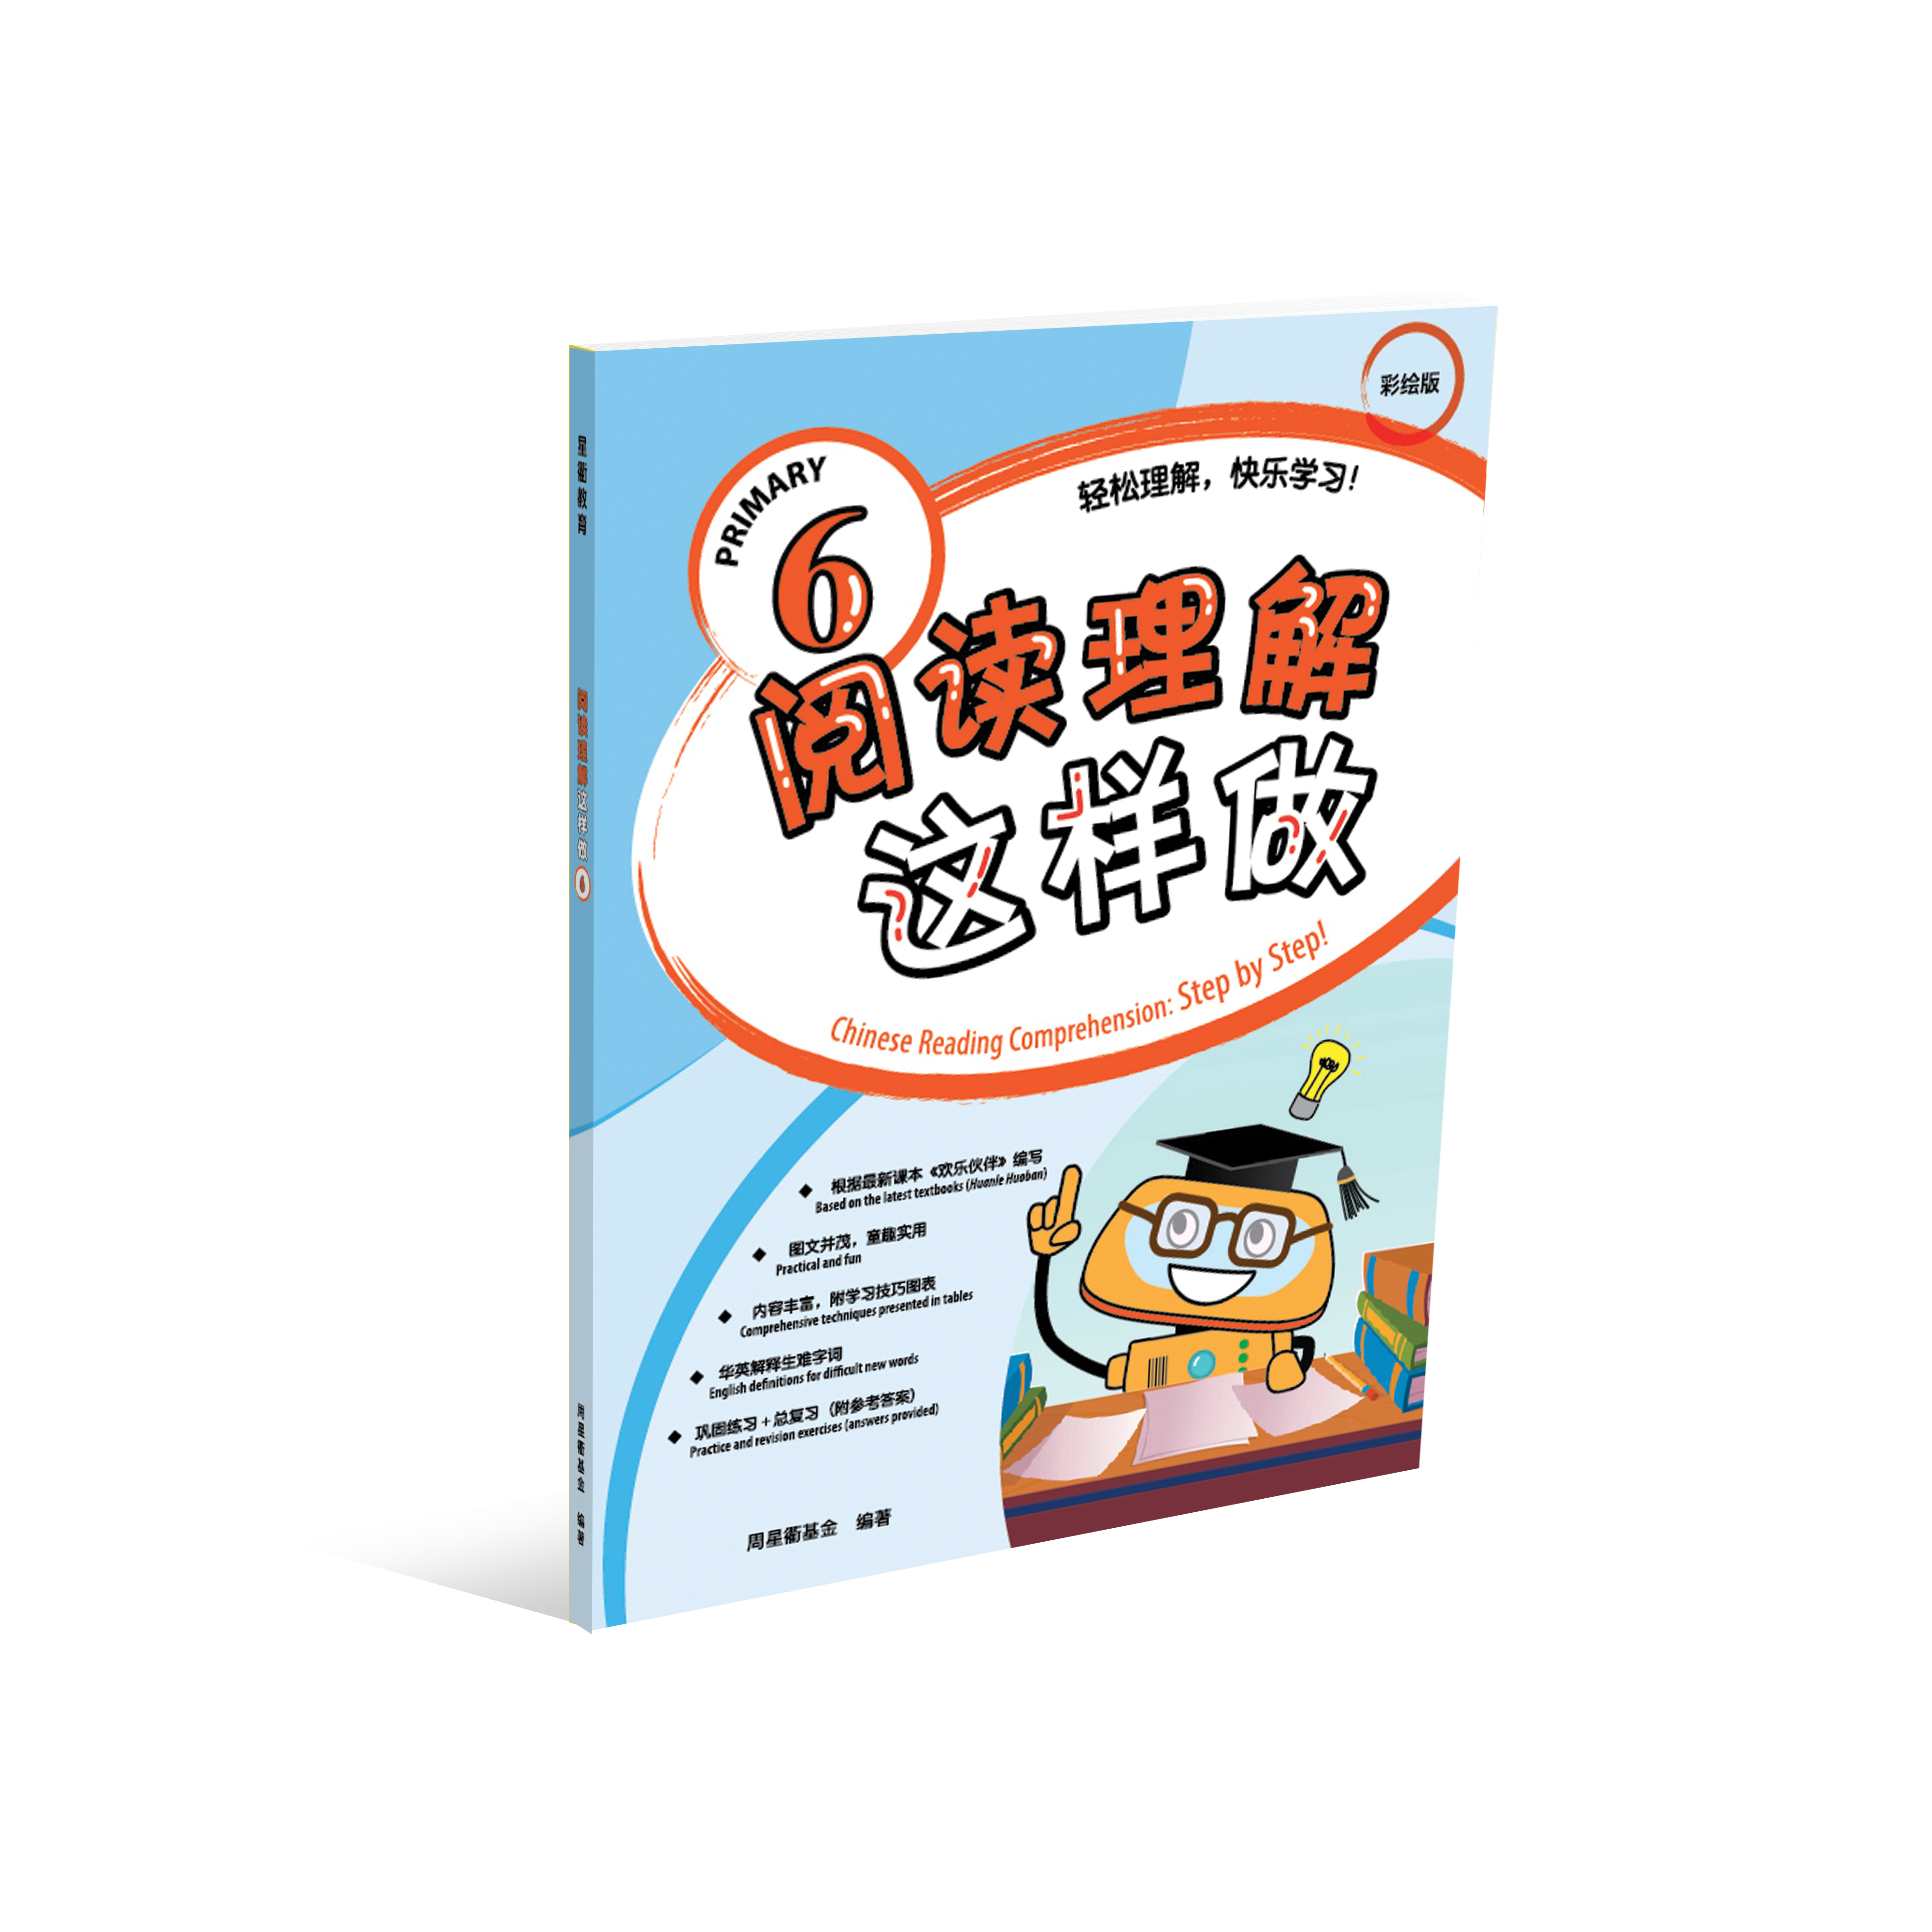 Primary 6 阅读理解这样做 Chinese Comprehension : Step By Step - Assessment Books, CHINESE, CHOU SING CHU FOUNDATION, EXCLUDE MS, PRIMARY 6